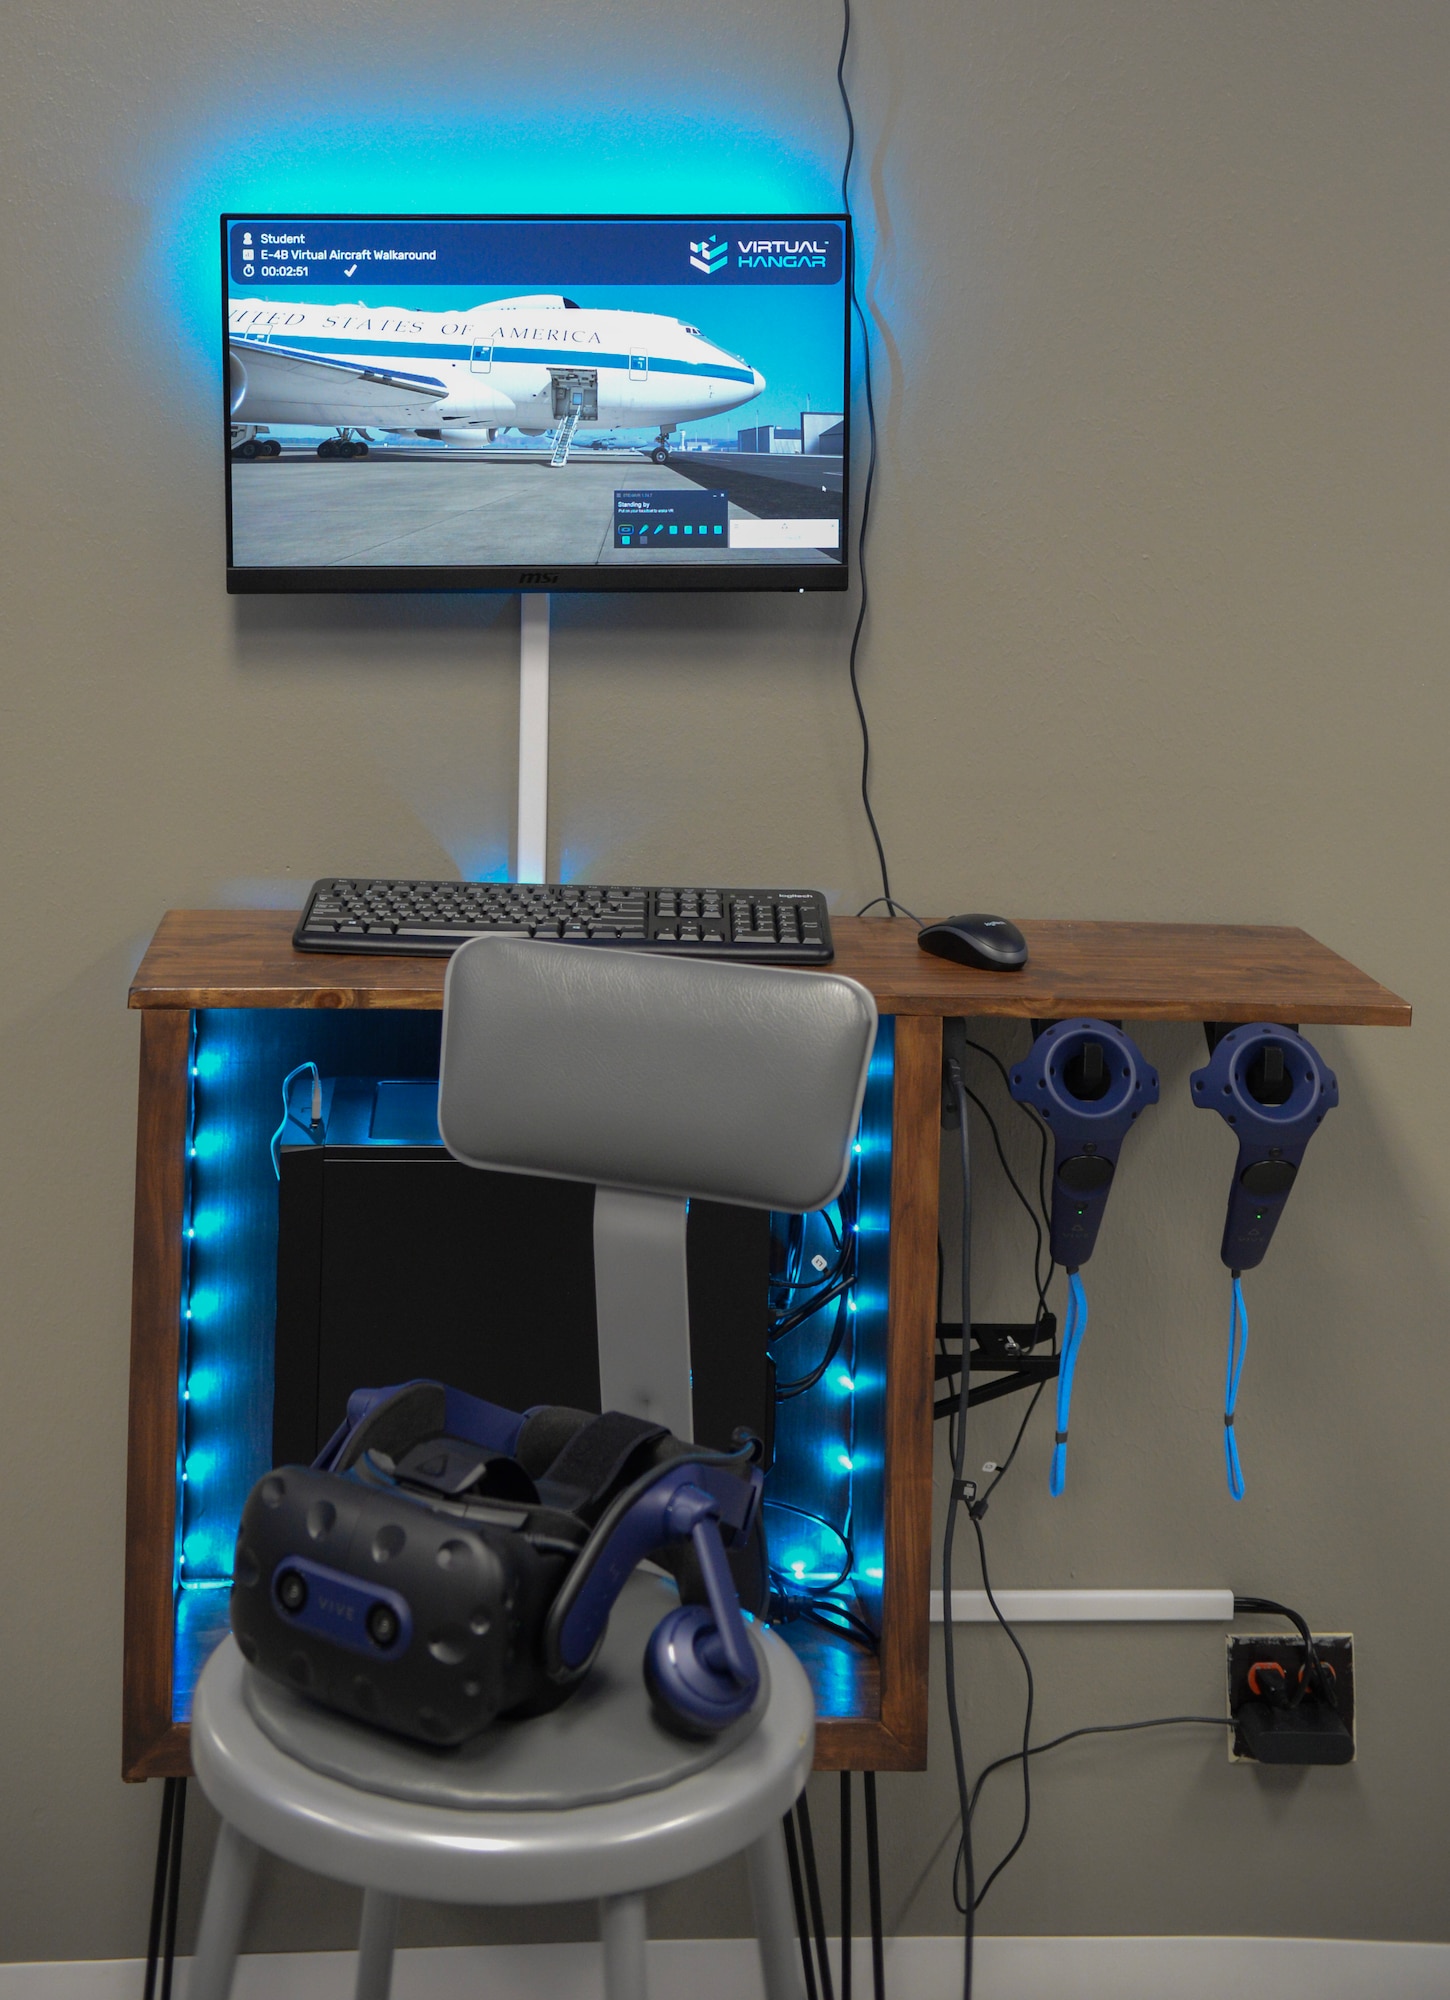 The 365th Training Squadron has recently upgraded their virtual reality equipment and renovated the training area.